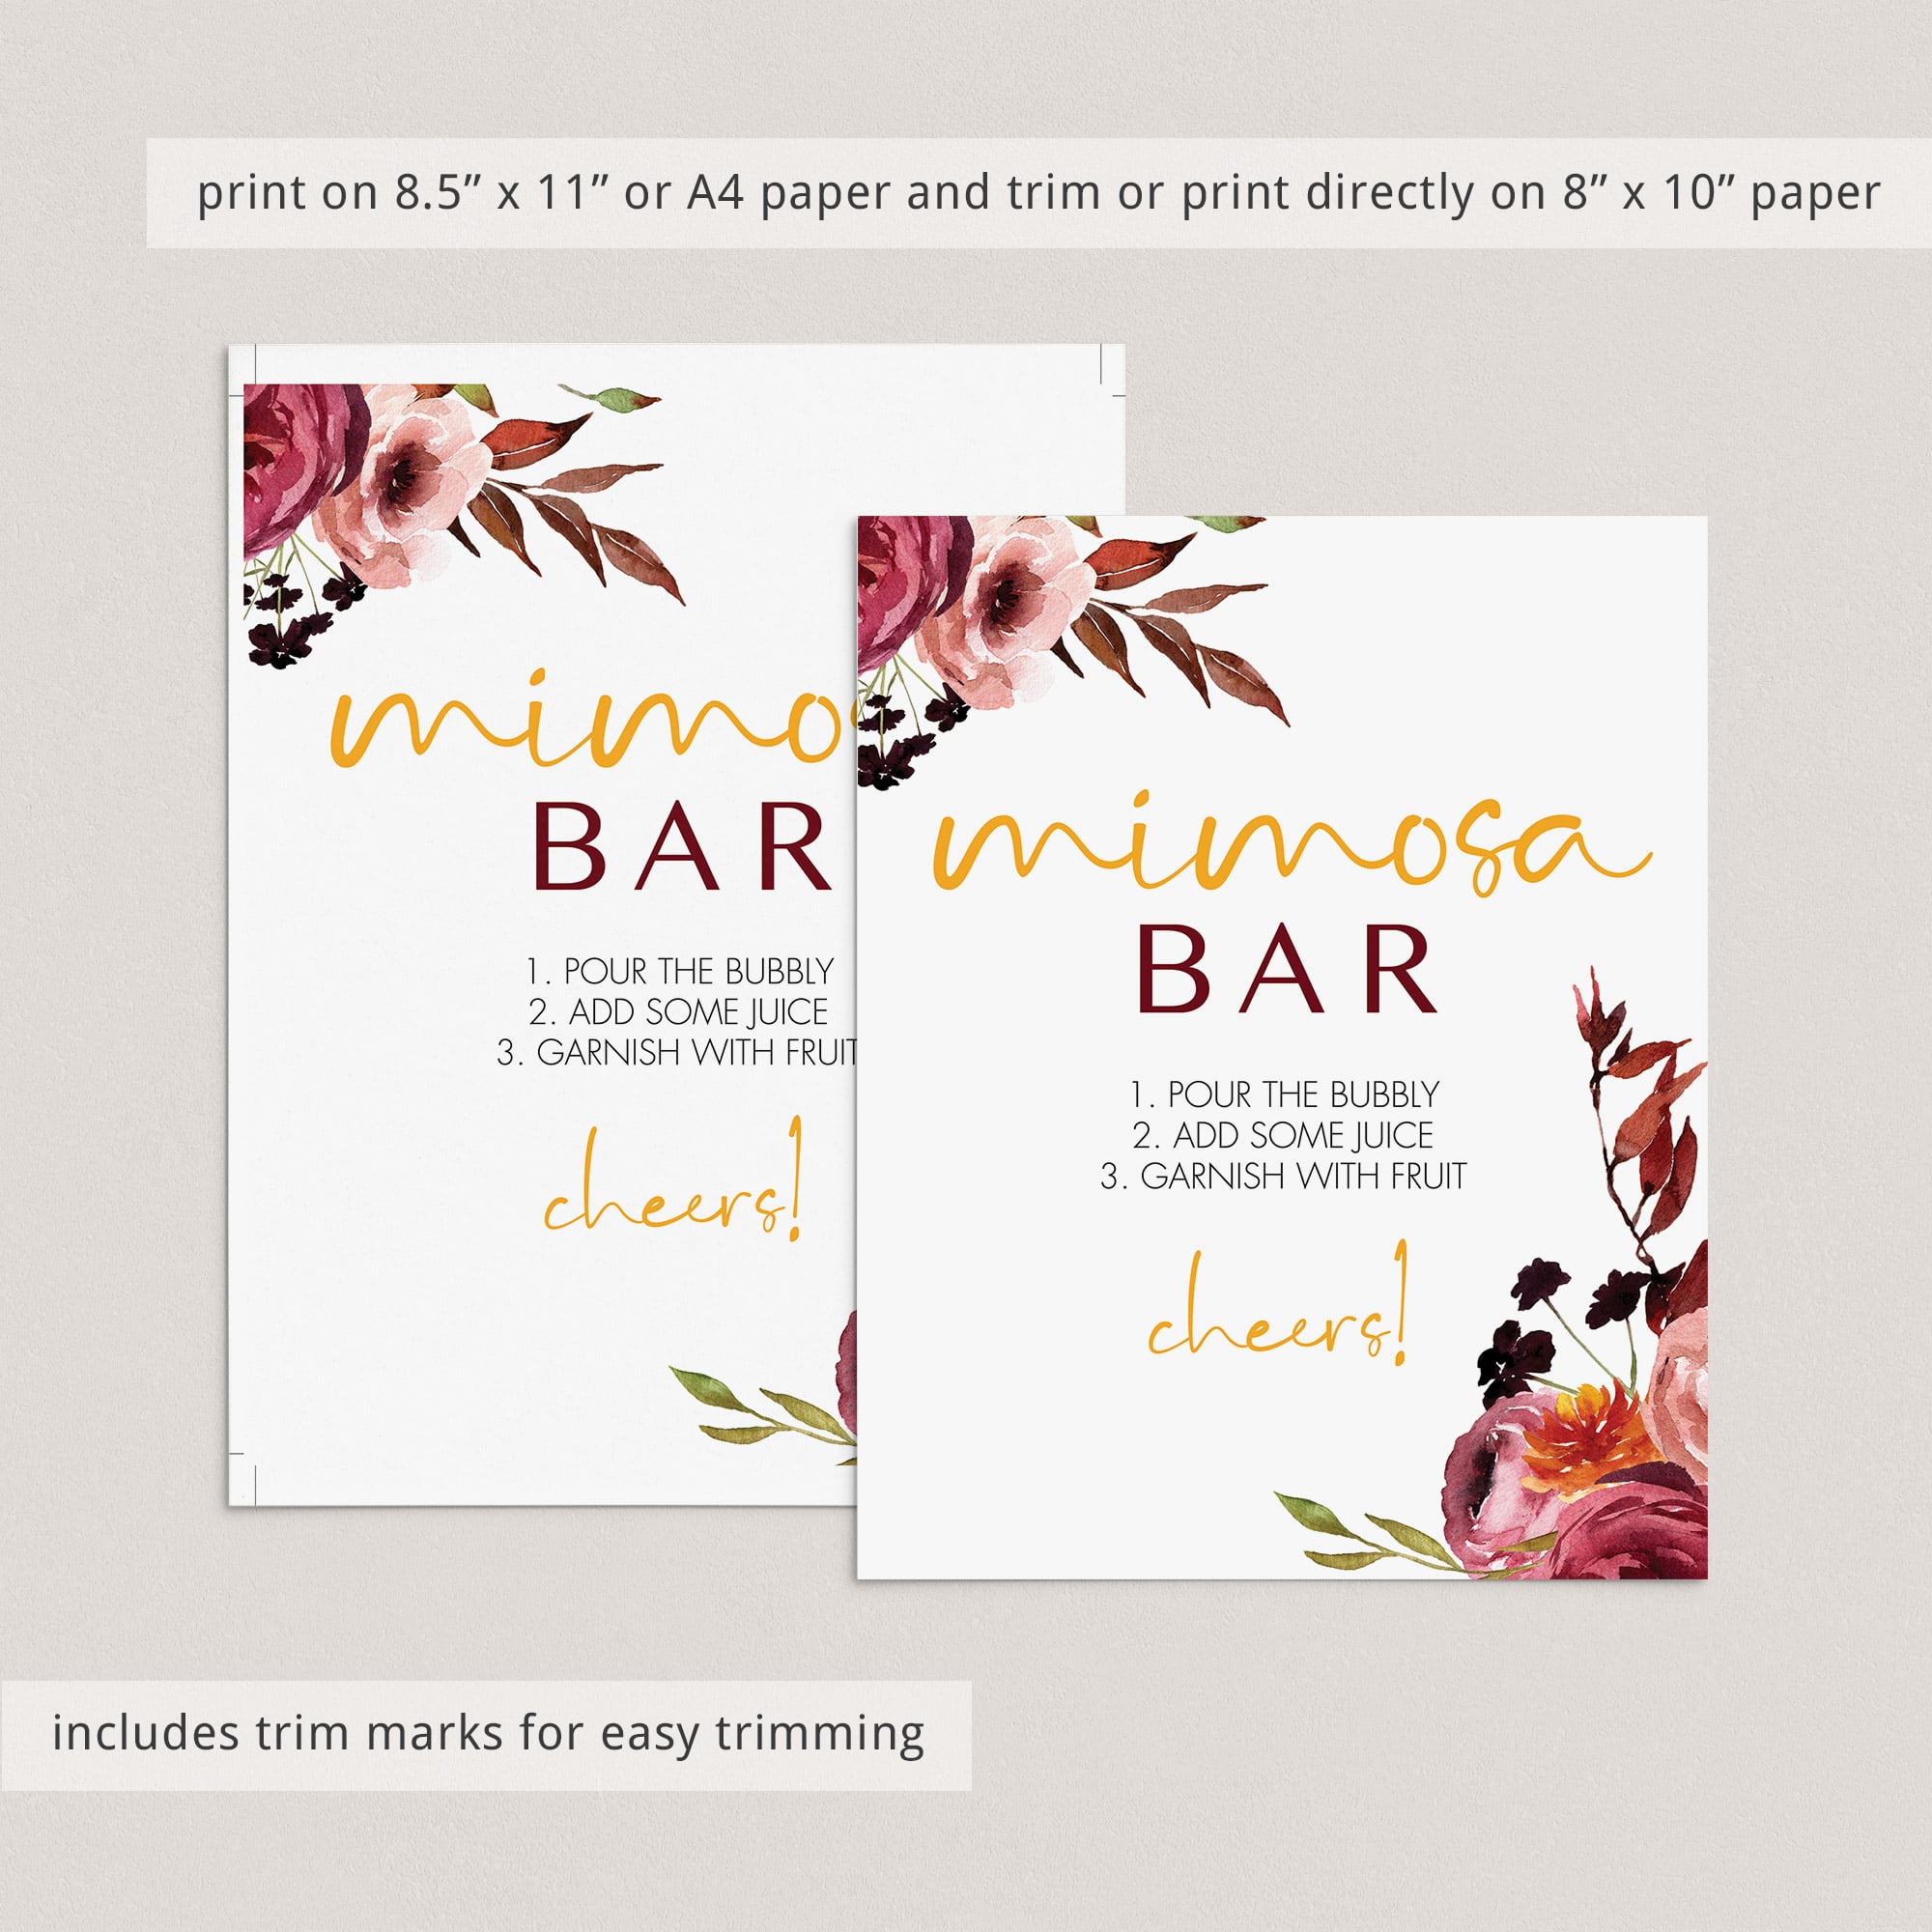 Boho chic cards and gifts sign instant download by LittleSizzle